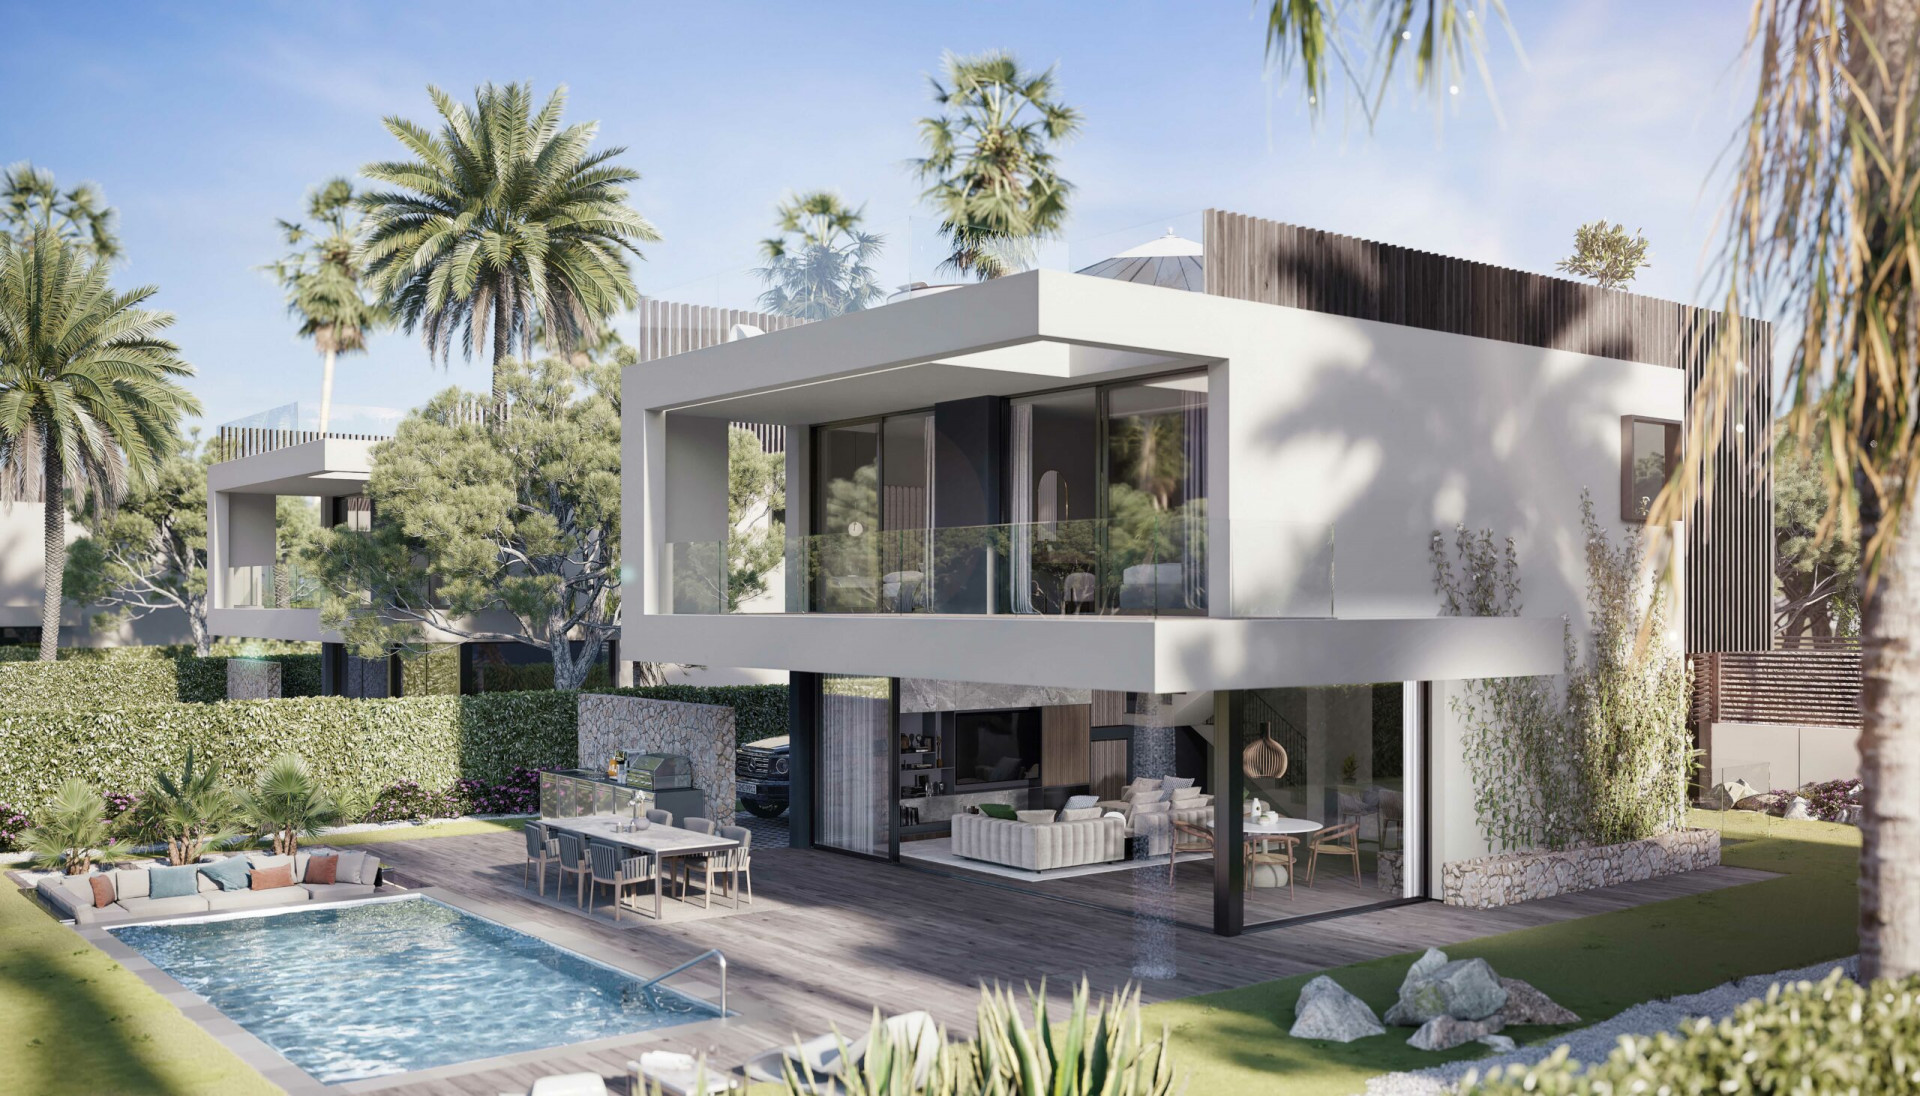 Incredible villas in the one of the most demanded zones in Marbella